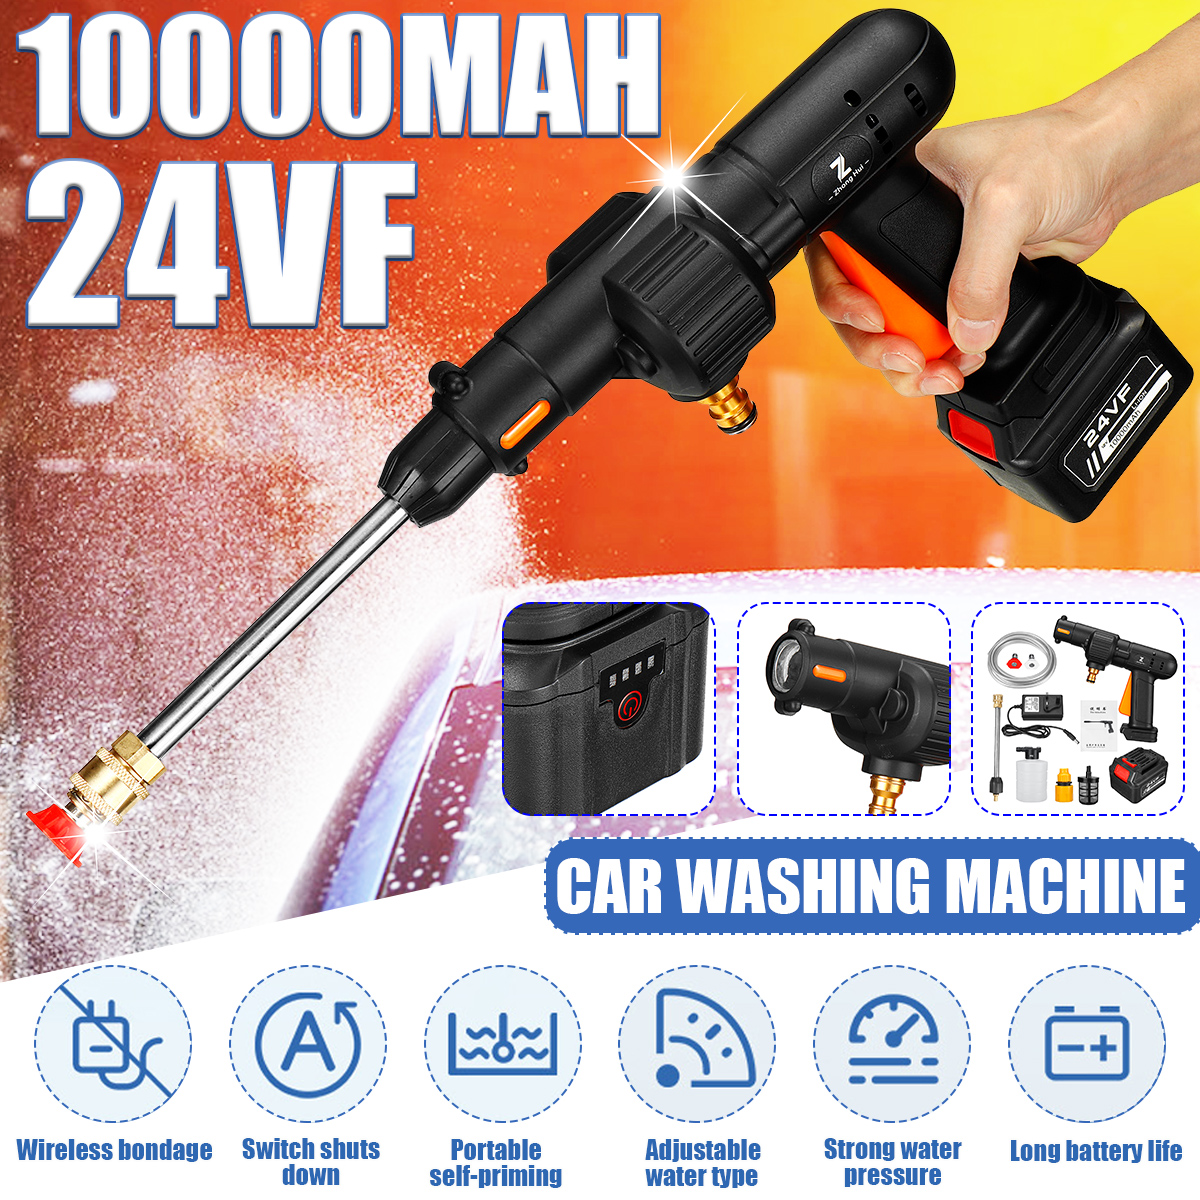 24V-Wireless-Car-Waher-10000mAH-With-Battery-Indicator-Electric-High-Pressure-Washer-Car-Washing-Mac-1856695-3